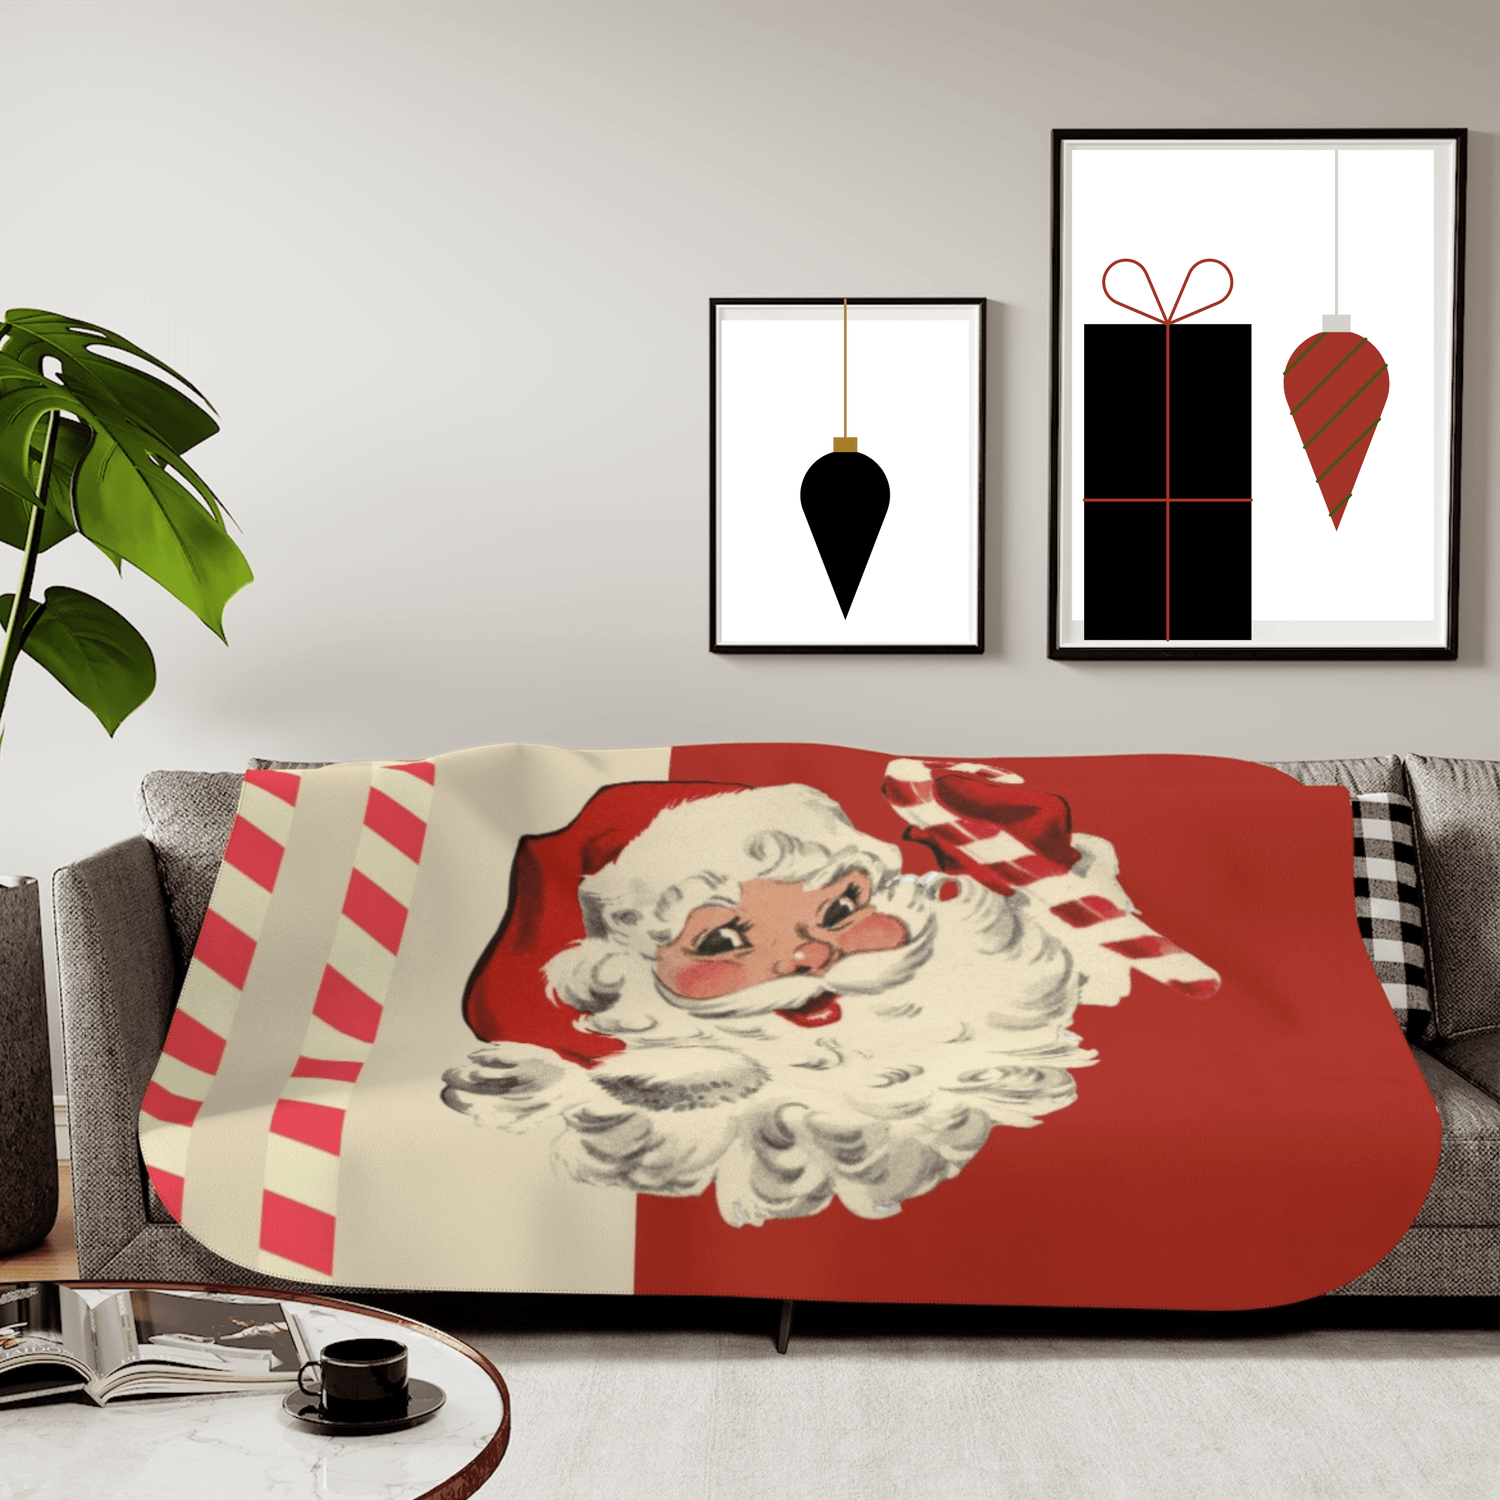 Vintage Santa Claus, Retro Christmas, Mid Century Modern Holiday, Cranberry Red, Beige, Candy Cane Stripe Sherpa Blanket, Two Colors Home Decor